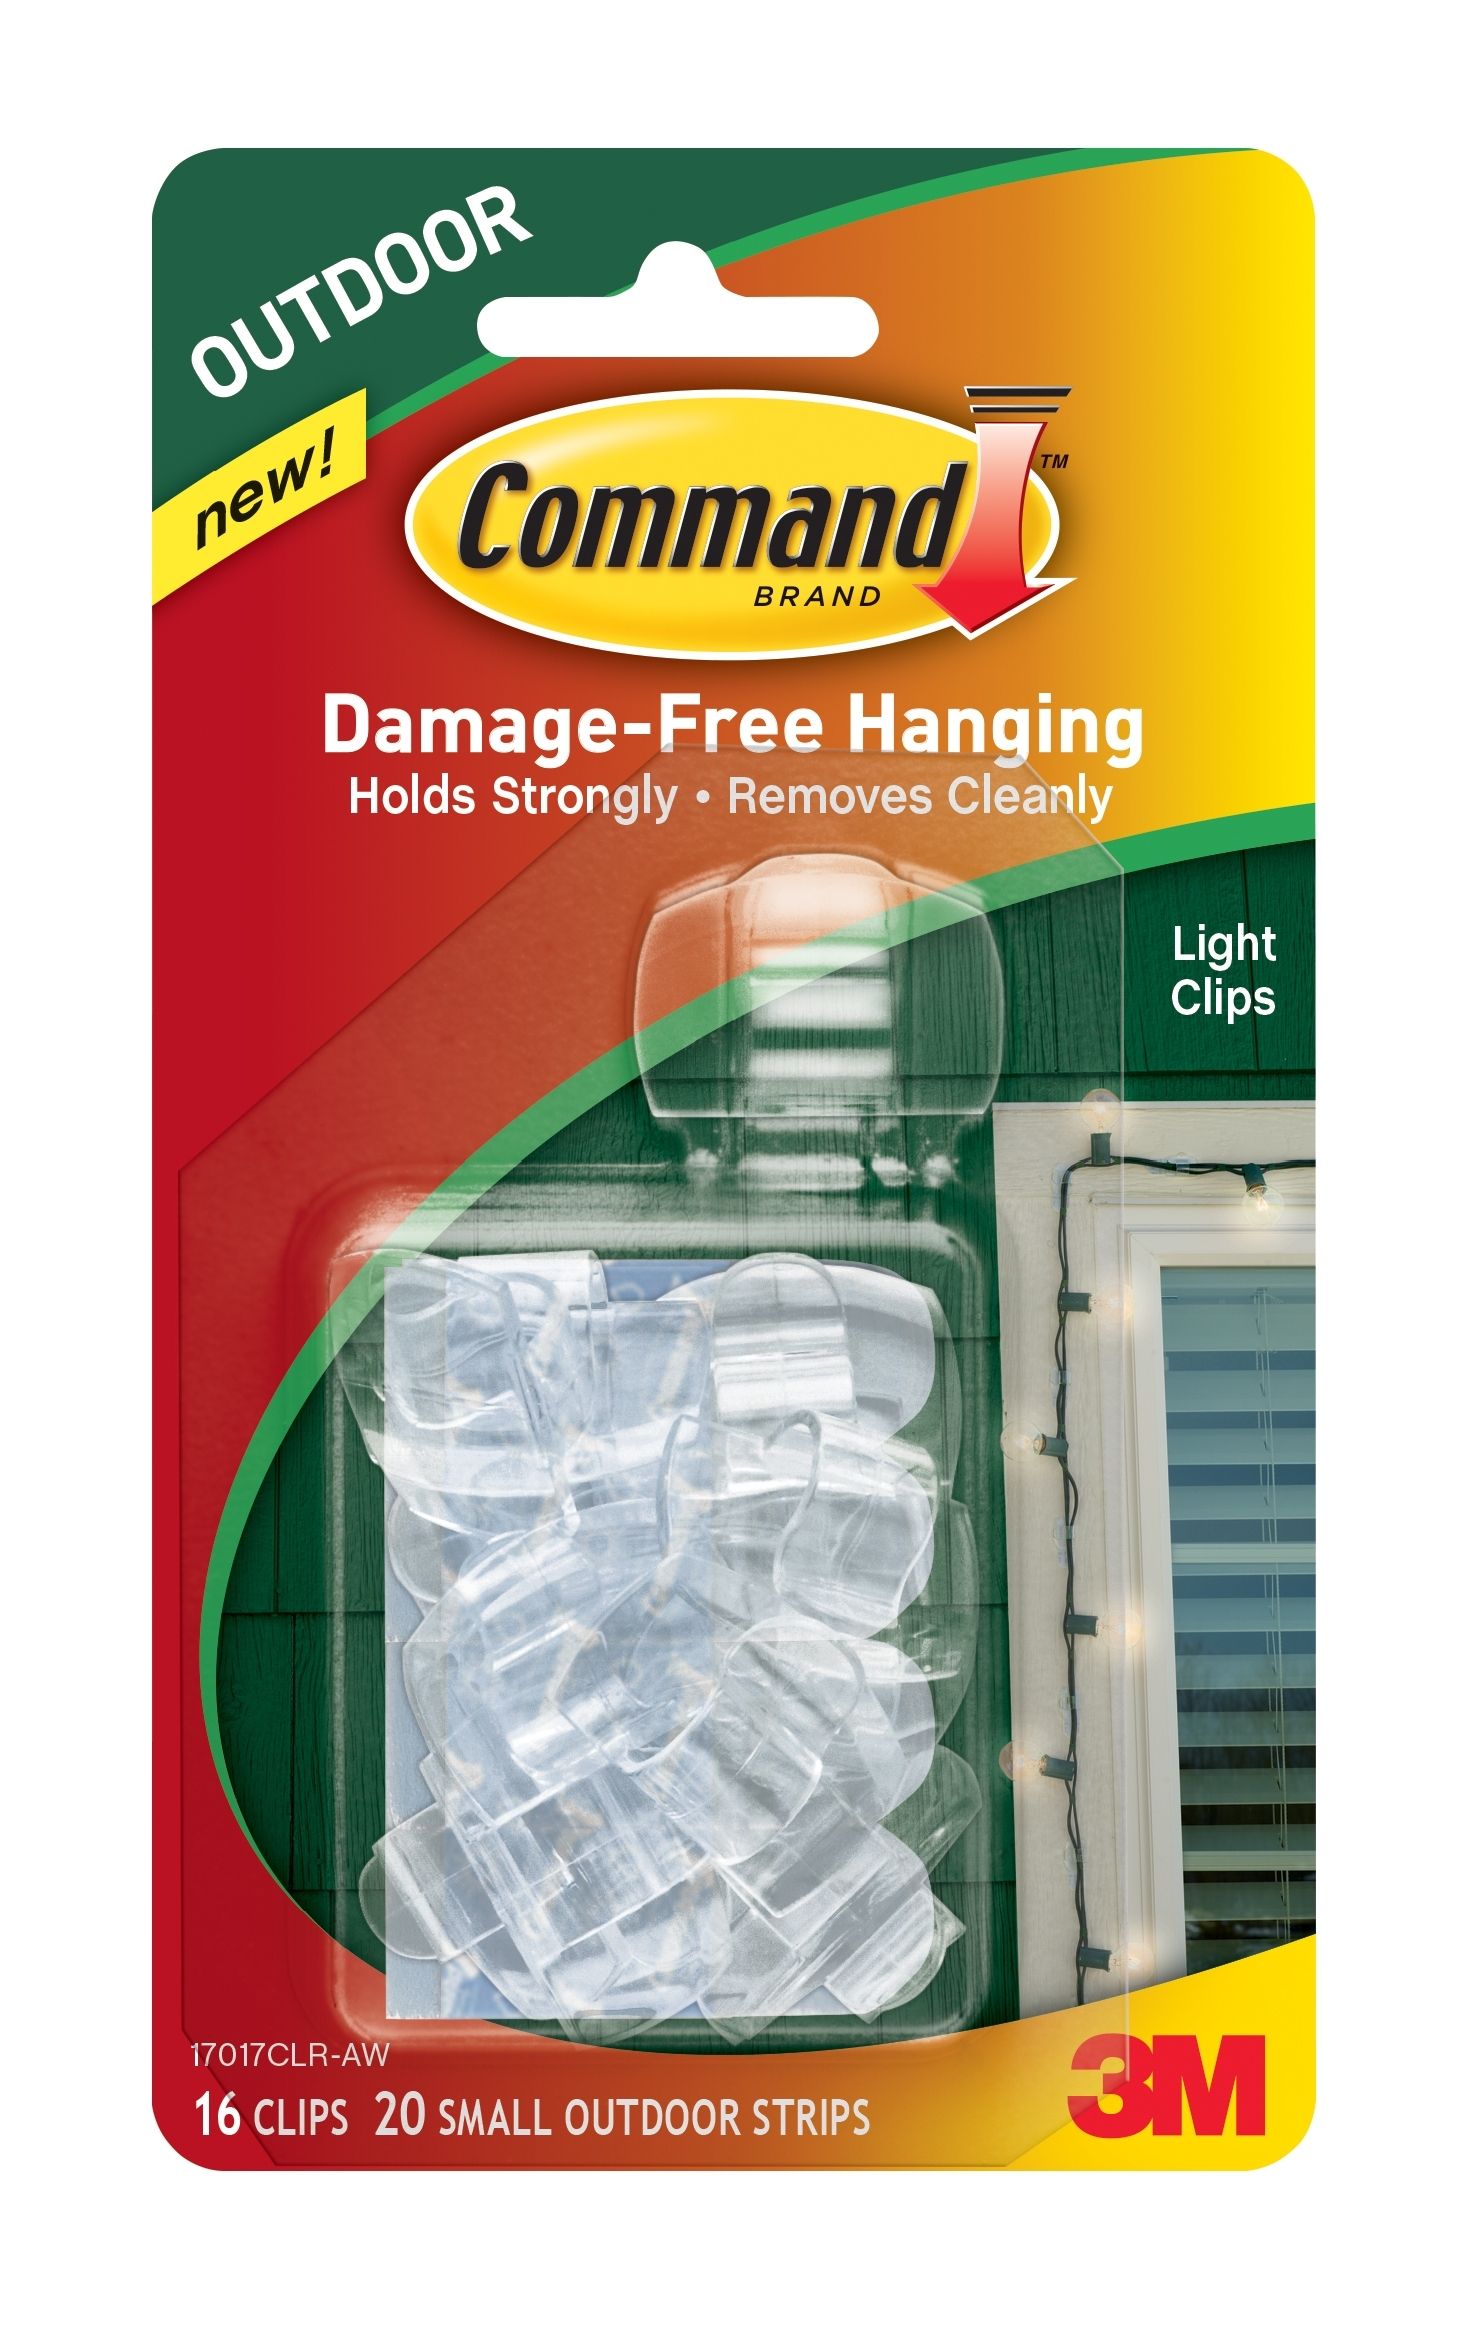 3m Introduces New Command Outdoor Decorating Products | Business Wire Inside Hanging Outdoor Christmas Lights Without Nails (Photo 12 of 15)